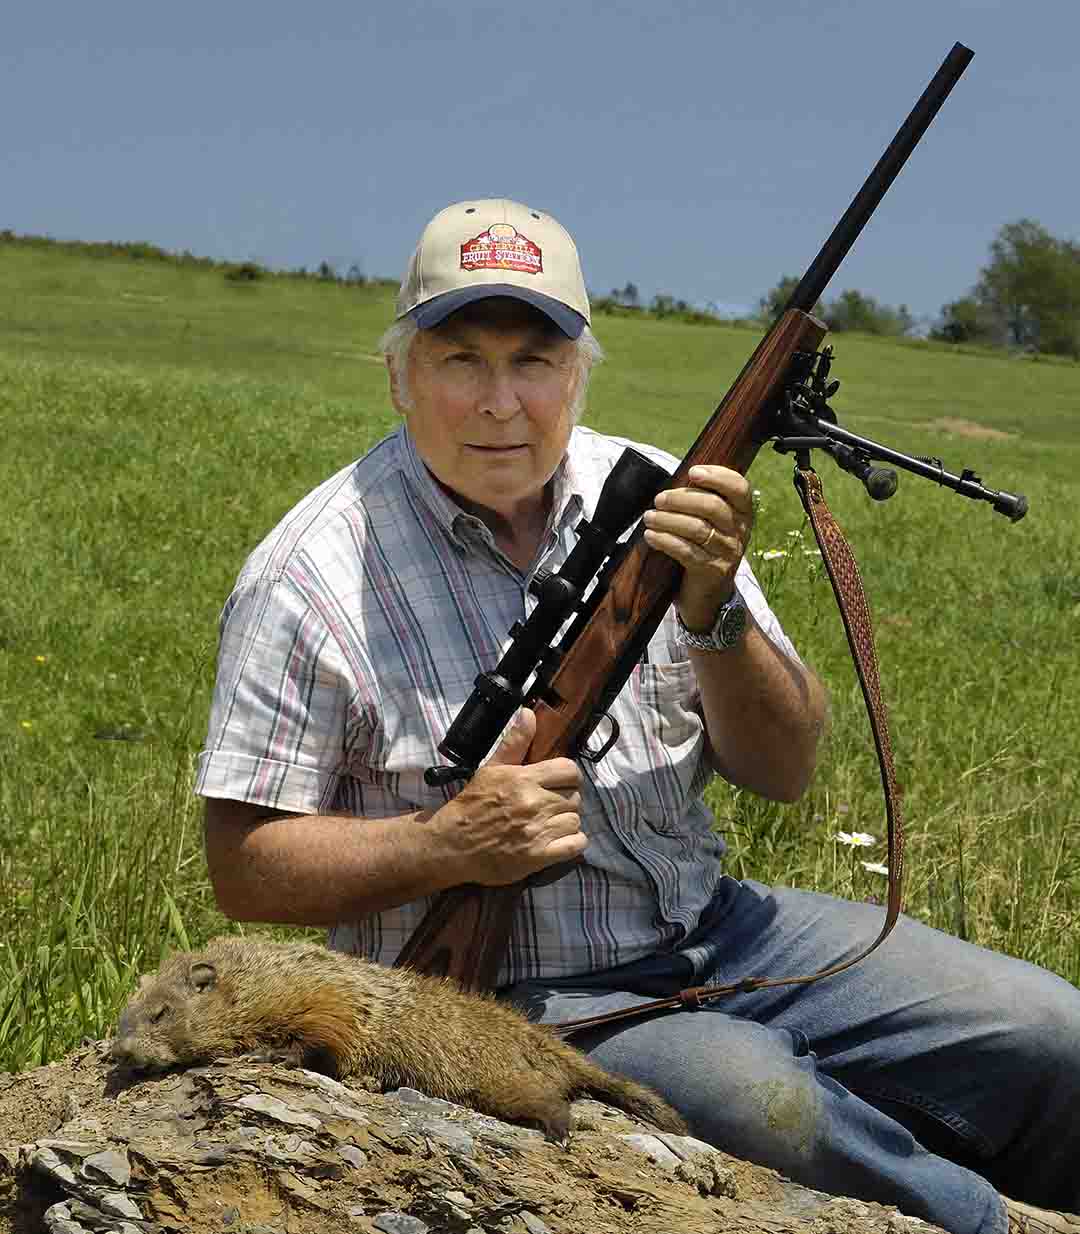 This is what it is all about when it comes to hunting woodchucks. On a bright summer’s day, the gun, scope, ammunition and the shooter made it all worthwhile on this pasture in New York state with this combination at just under a 100 yards.